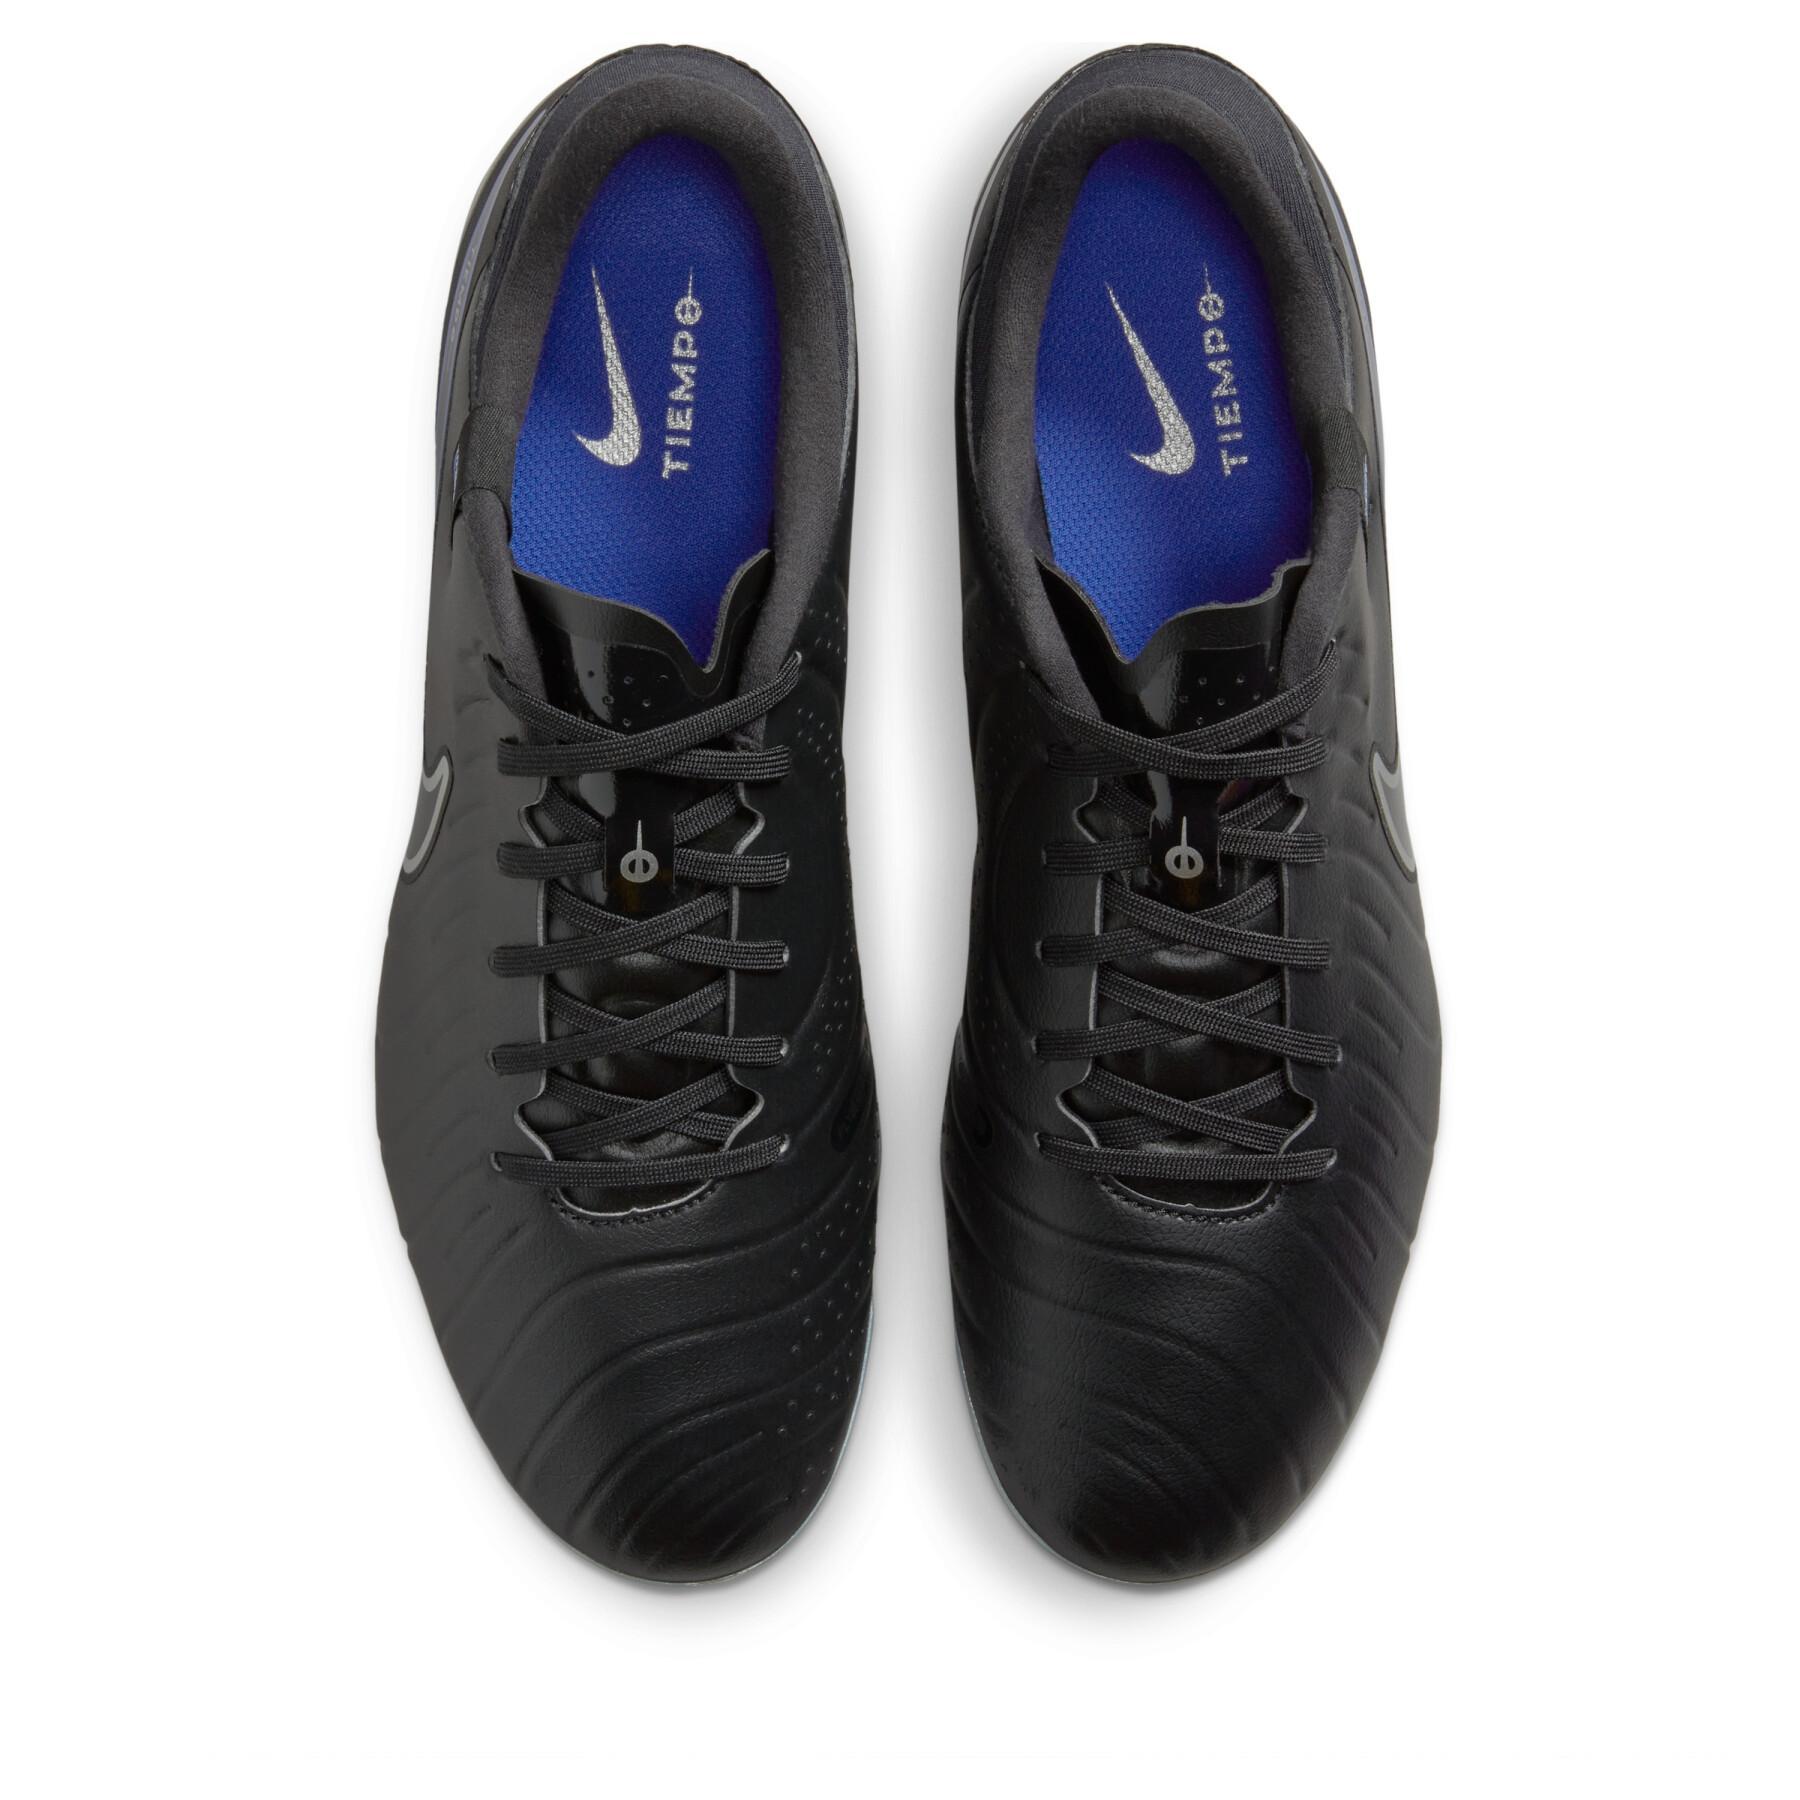 Chaussures de football Nike Tiempo Legend 10 Academy AG - Shadow Pack